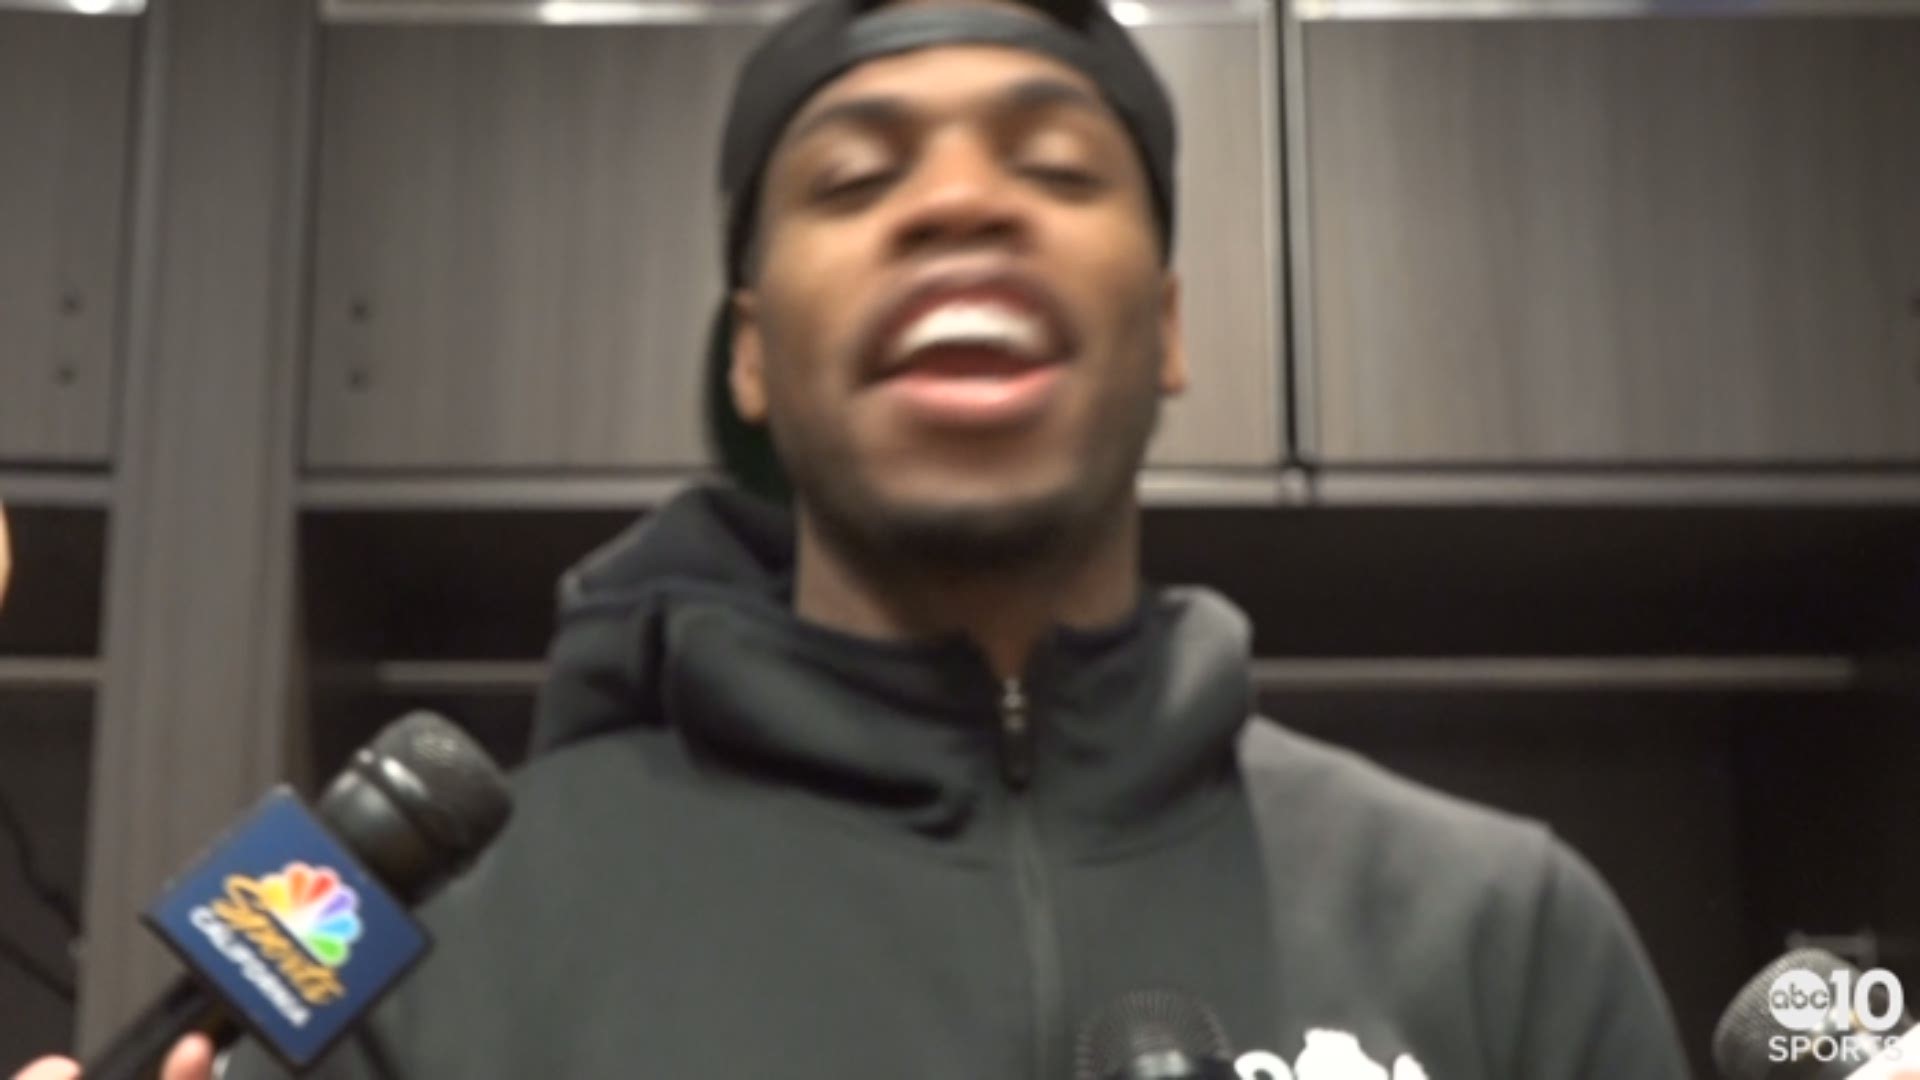 Kings guard Buddy Hield discusses his 25-point performance, coming up big in Monday's win over the Oklahoma City Thunder and his teammate Iman Shumpert,